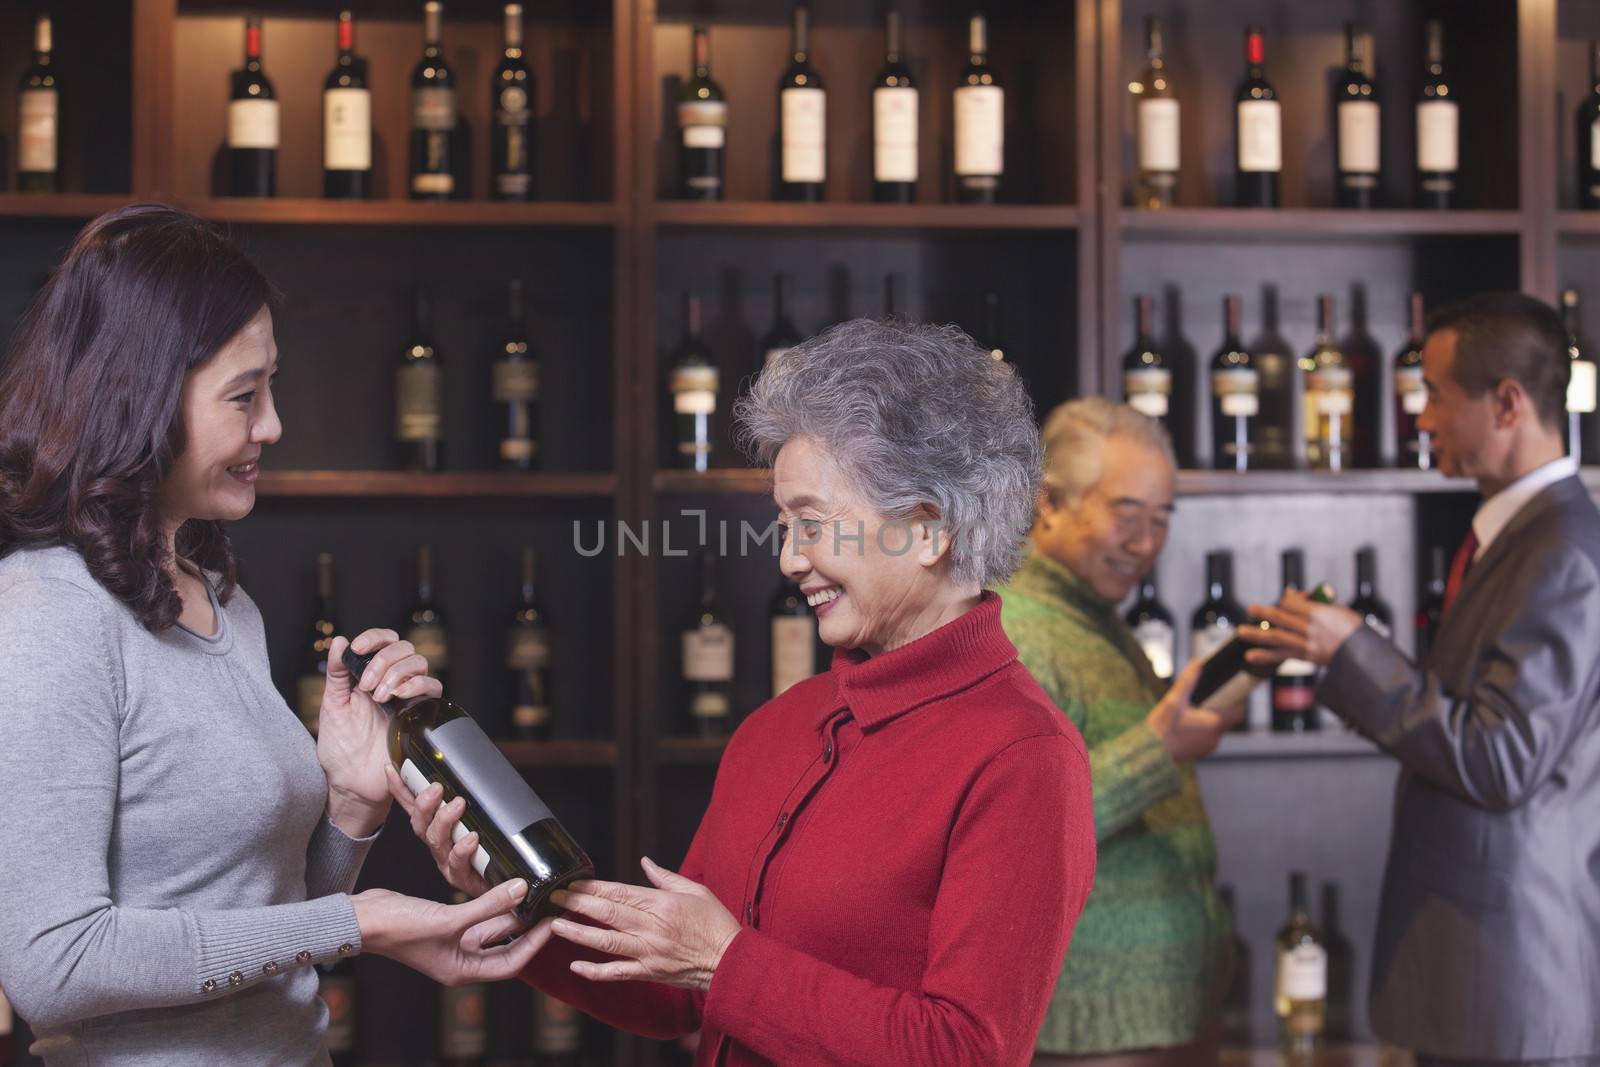 People Examining Wine Bottles, Two Women in the Foreground